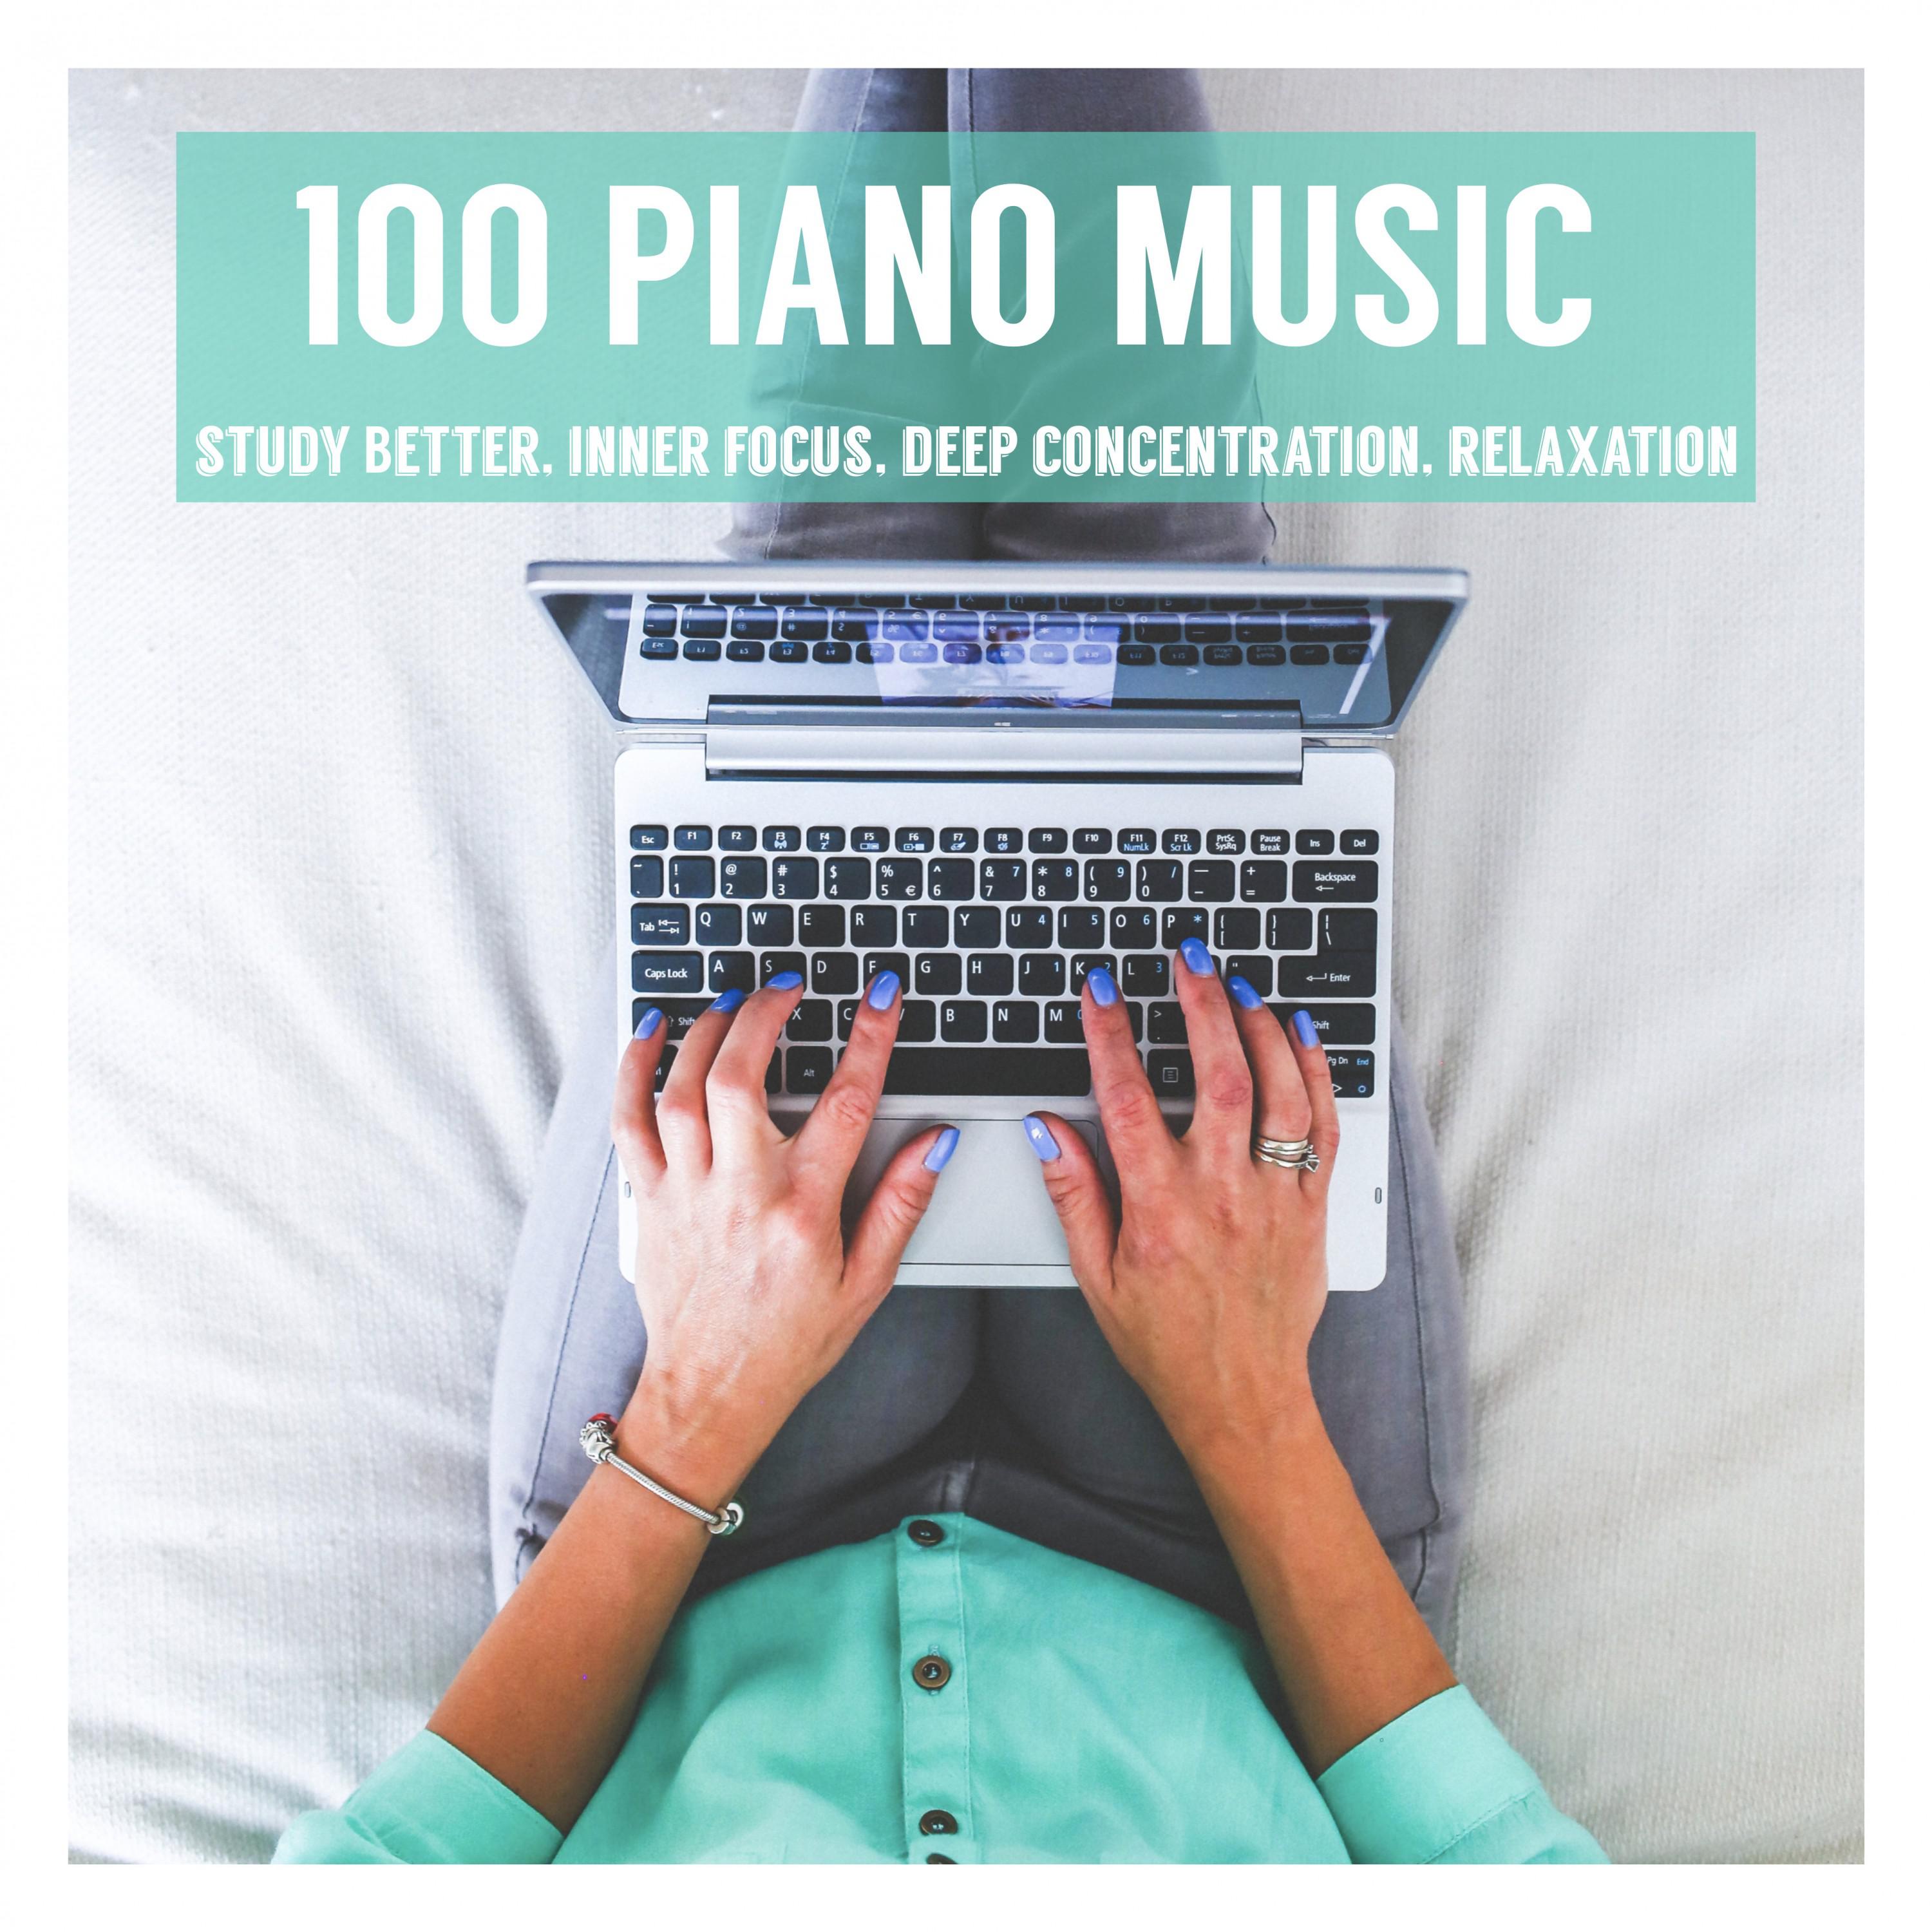 100 Piano Music: Study Better, Inner Focus, Deep Concentration, Relaxation, Background Melody, Intense Learning